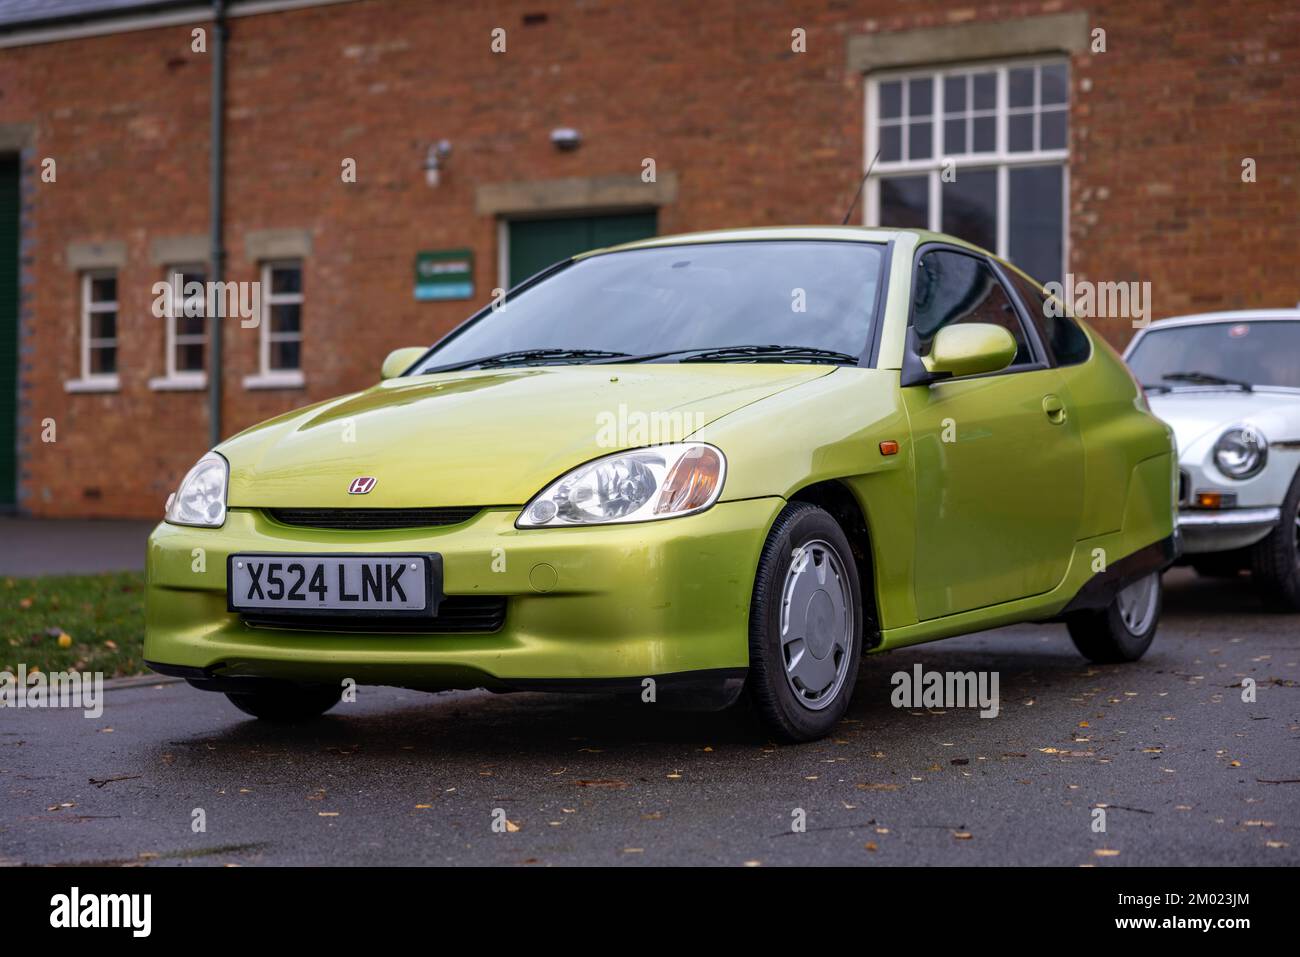 2001 Honda Insight ‘X524 LNK’ on display at the Workhorse Assembly held at the Bicester Heritage Centre on the 27th November 2022 Stock Photo